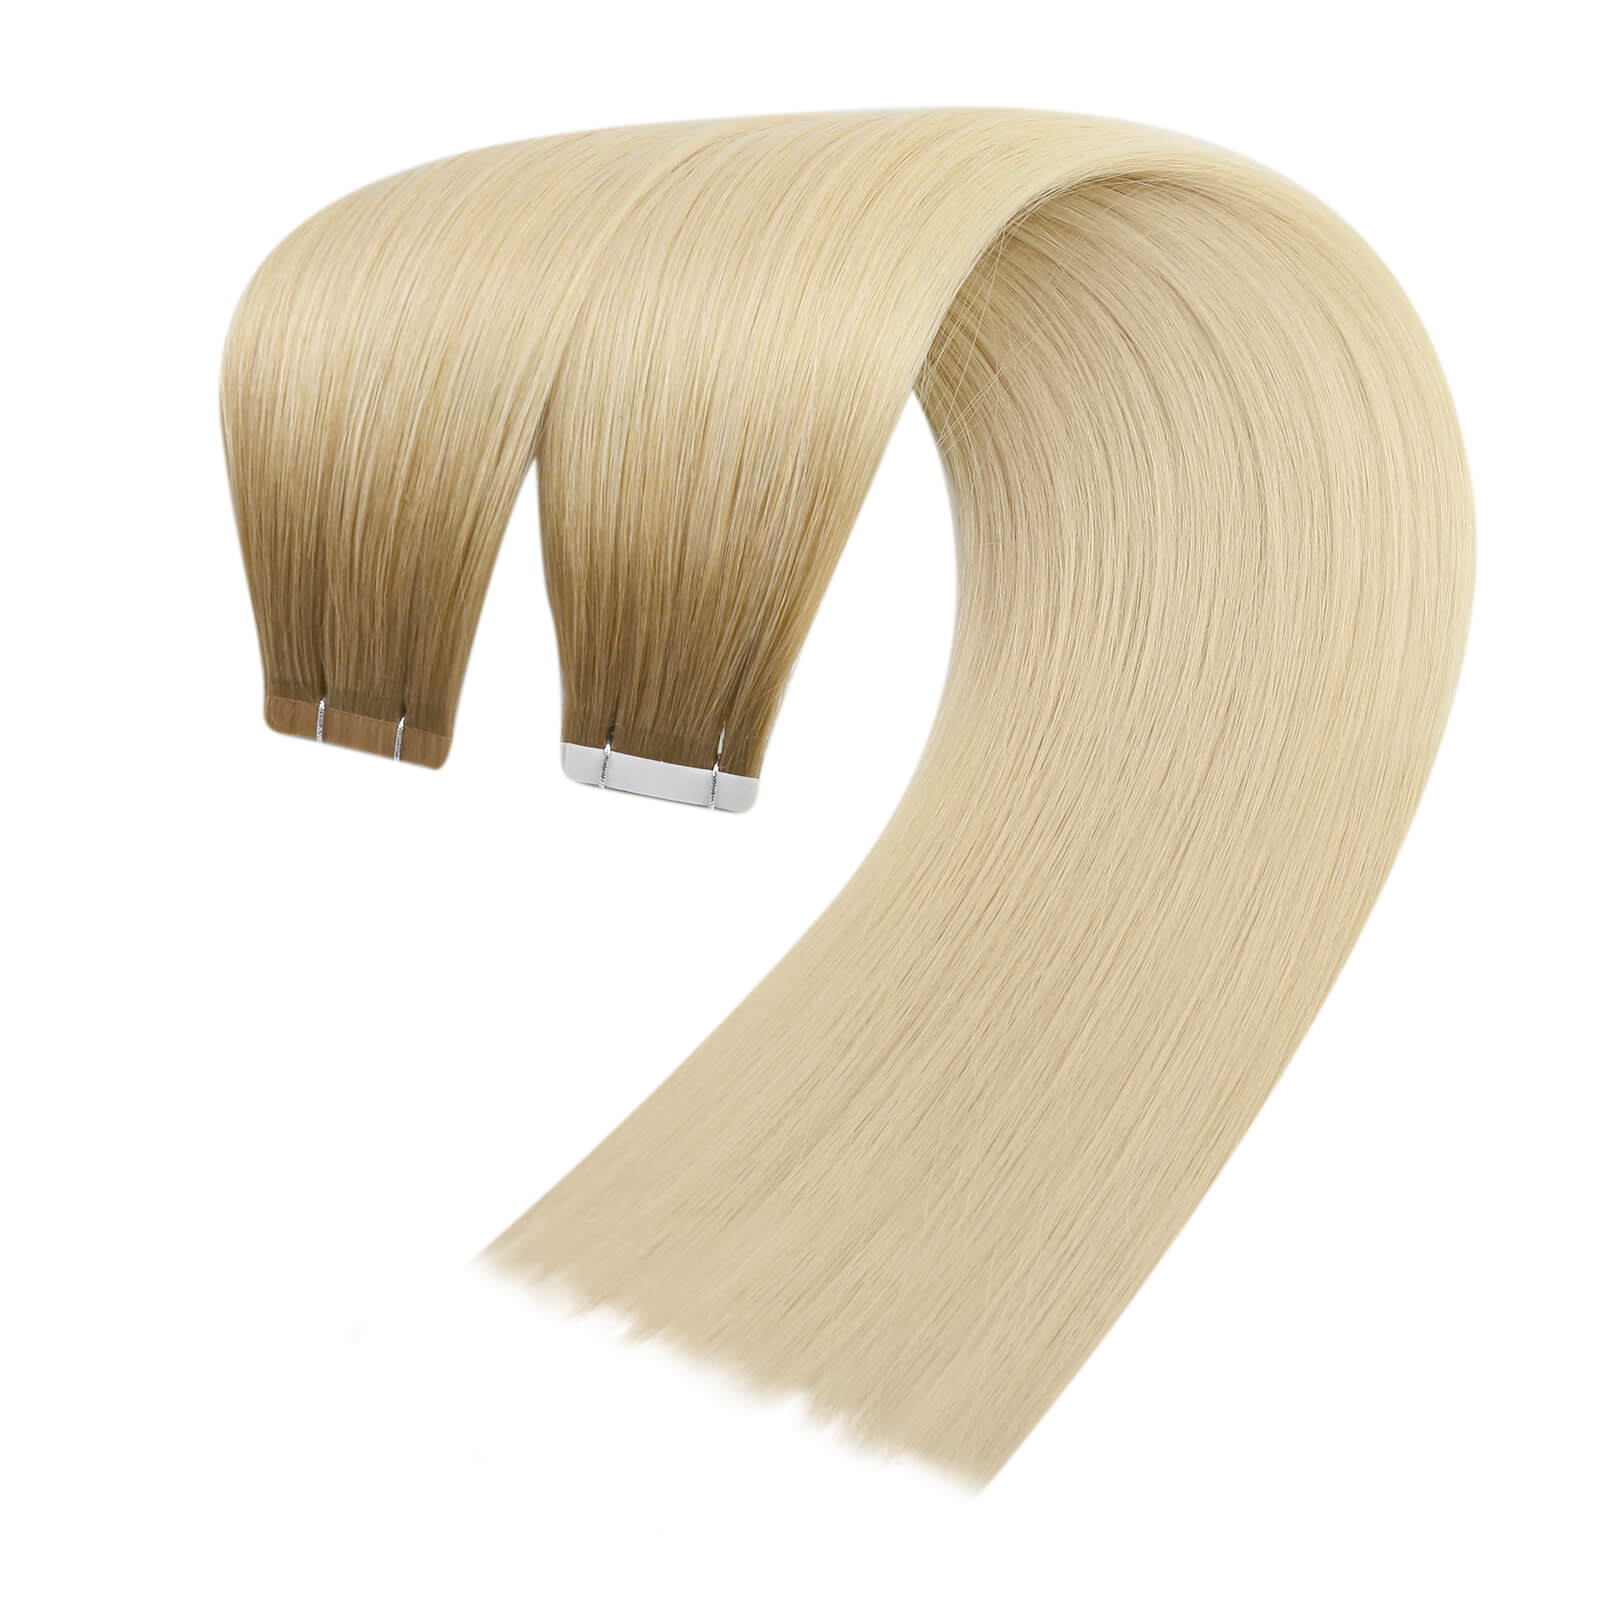 tape in hair extensions,hair tape,best tape in hair extensions,22 inch tape in hair extensions,borgin hair extensions